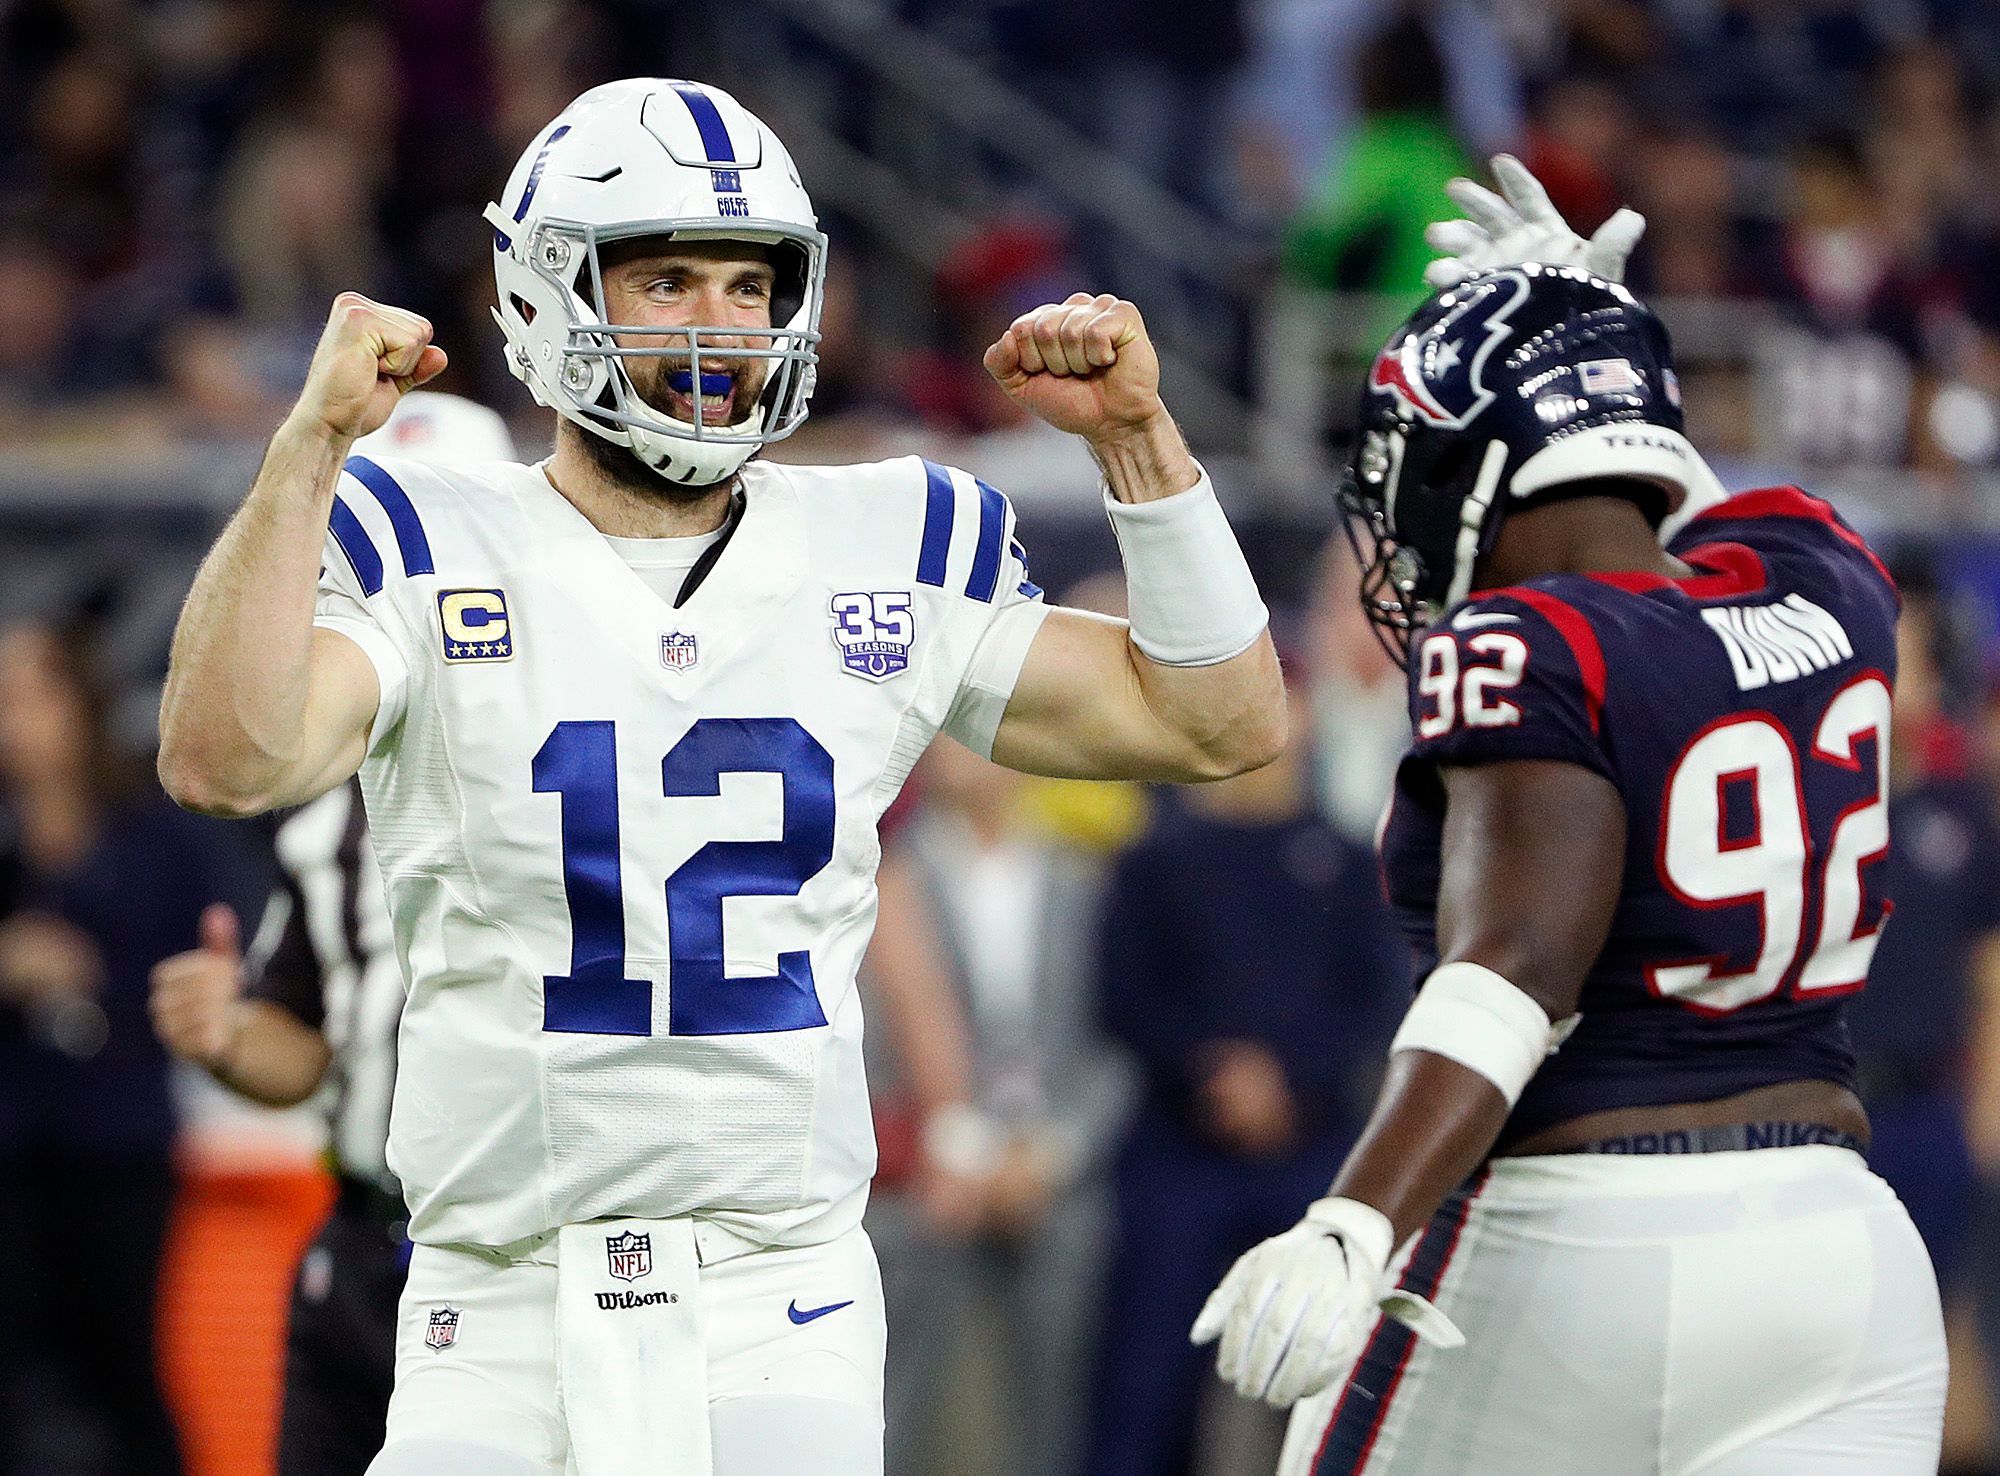 Indianapolis Colts quarterback Andrew Luck (12) begins to celebrate in the fourth quarter of their AFC Wild Card playoff game at NRG Stadium in Houston, TX., on Saturday, Jan. 5, 2019. Indianapolis Colts Play At Houston Texans